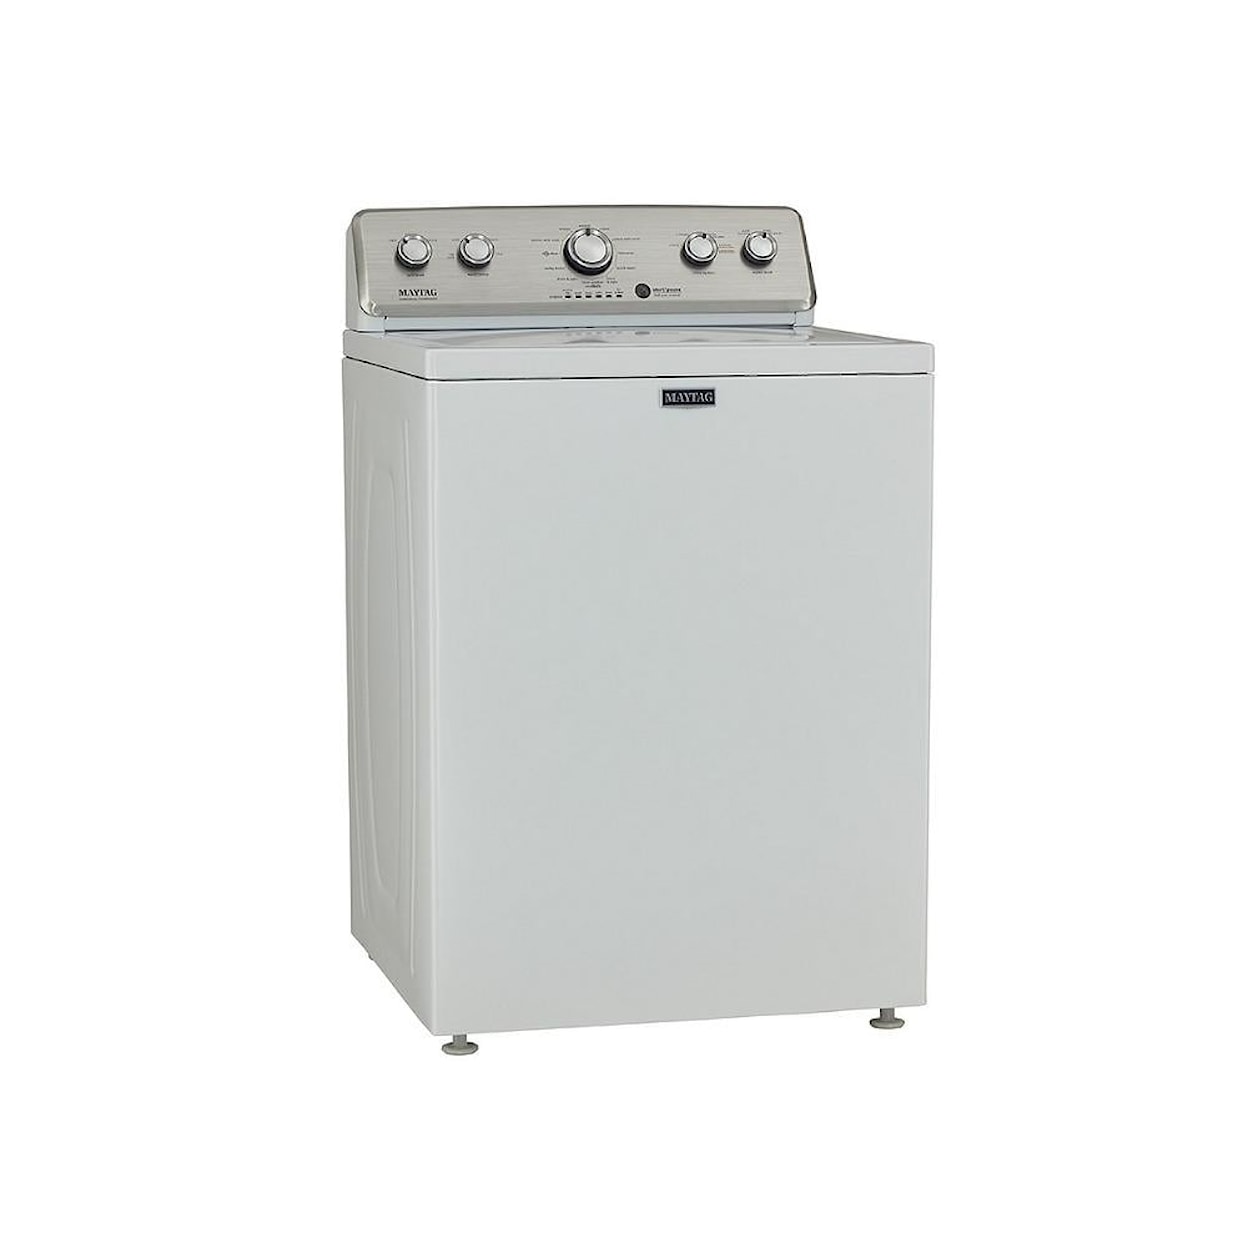 Maytag Laundry Traditional Top Load Washer